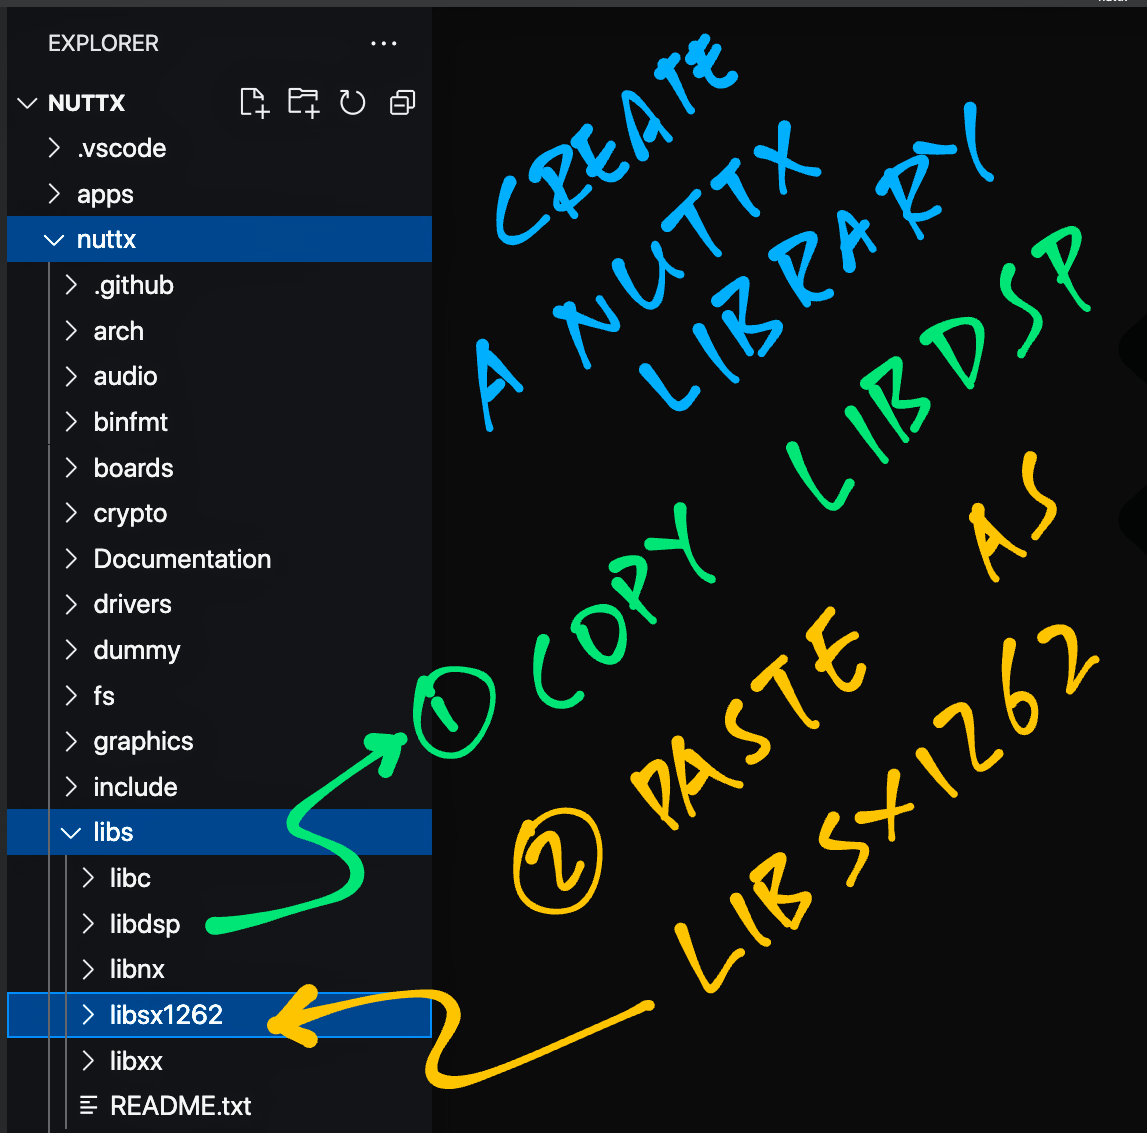 Copy the “libdsp” subfolder and paste it as “libsx1262”